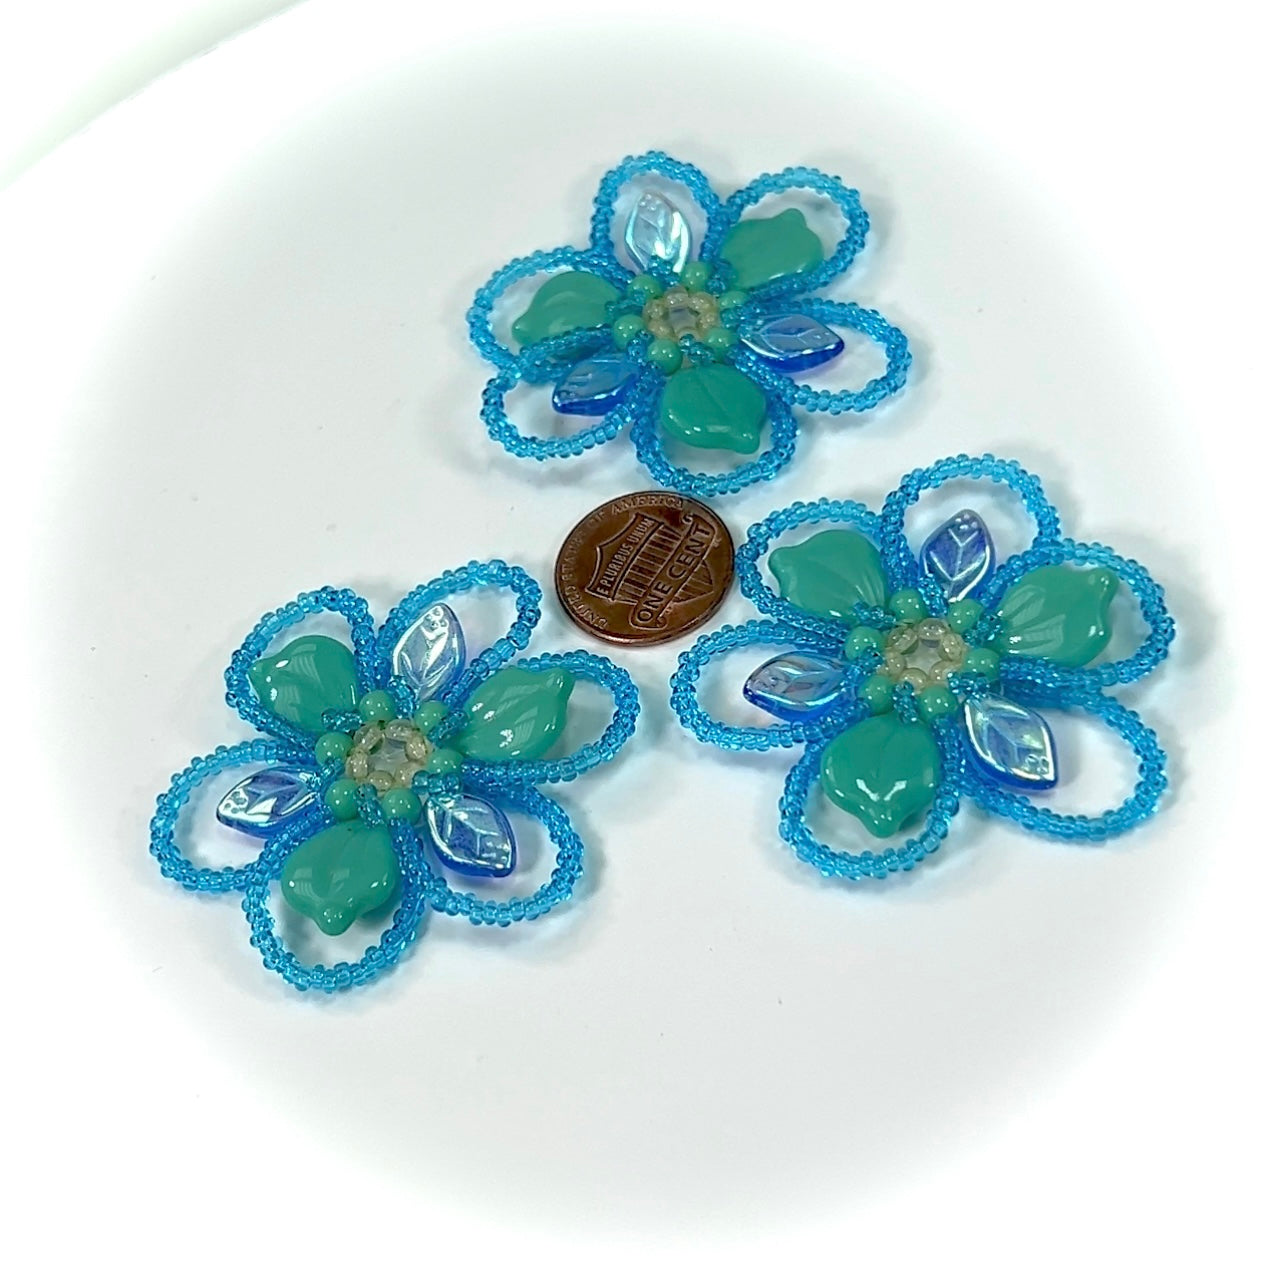 Czech Glass Beads 2 inch Flower Ornament Blue Turquoise Multi Combination 1 piece CA016